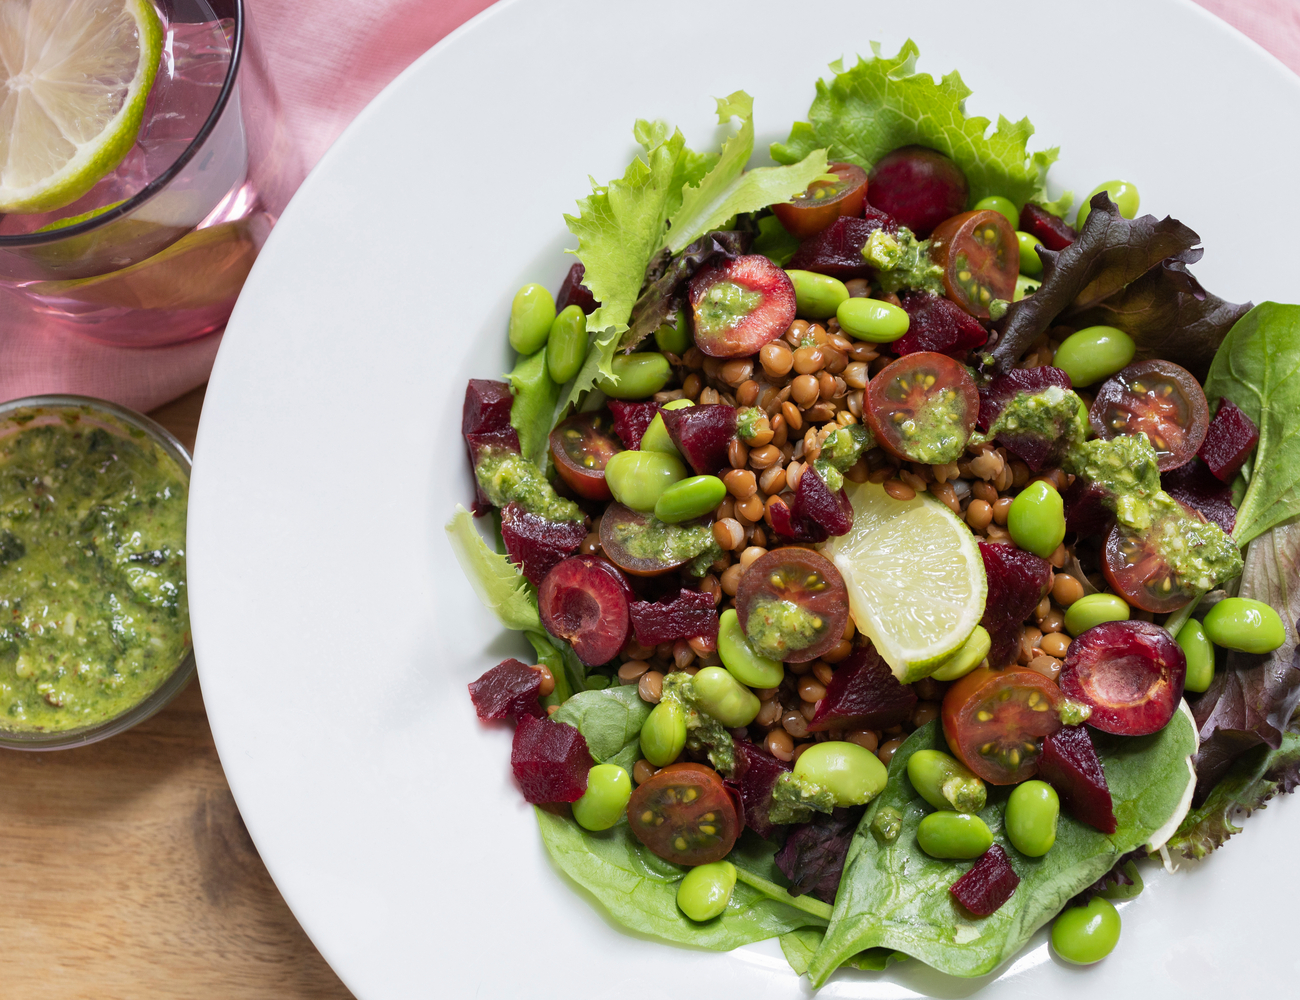 Fresh salad of lentils, edamame, beets, cherry tomatoes, green leaves and homemade pesto sauce